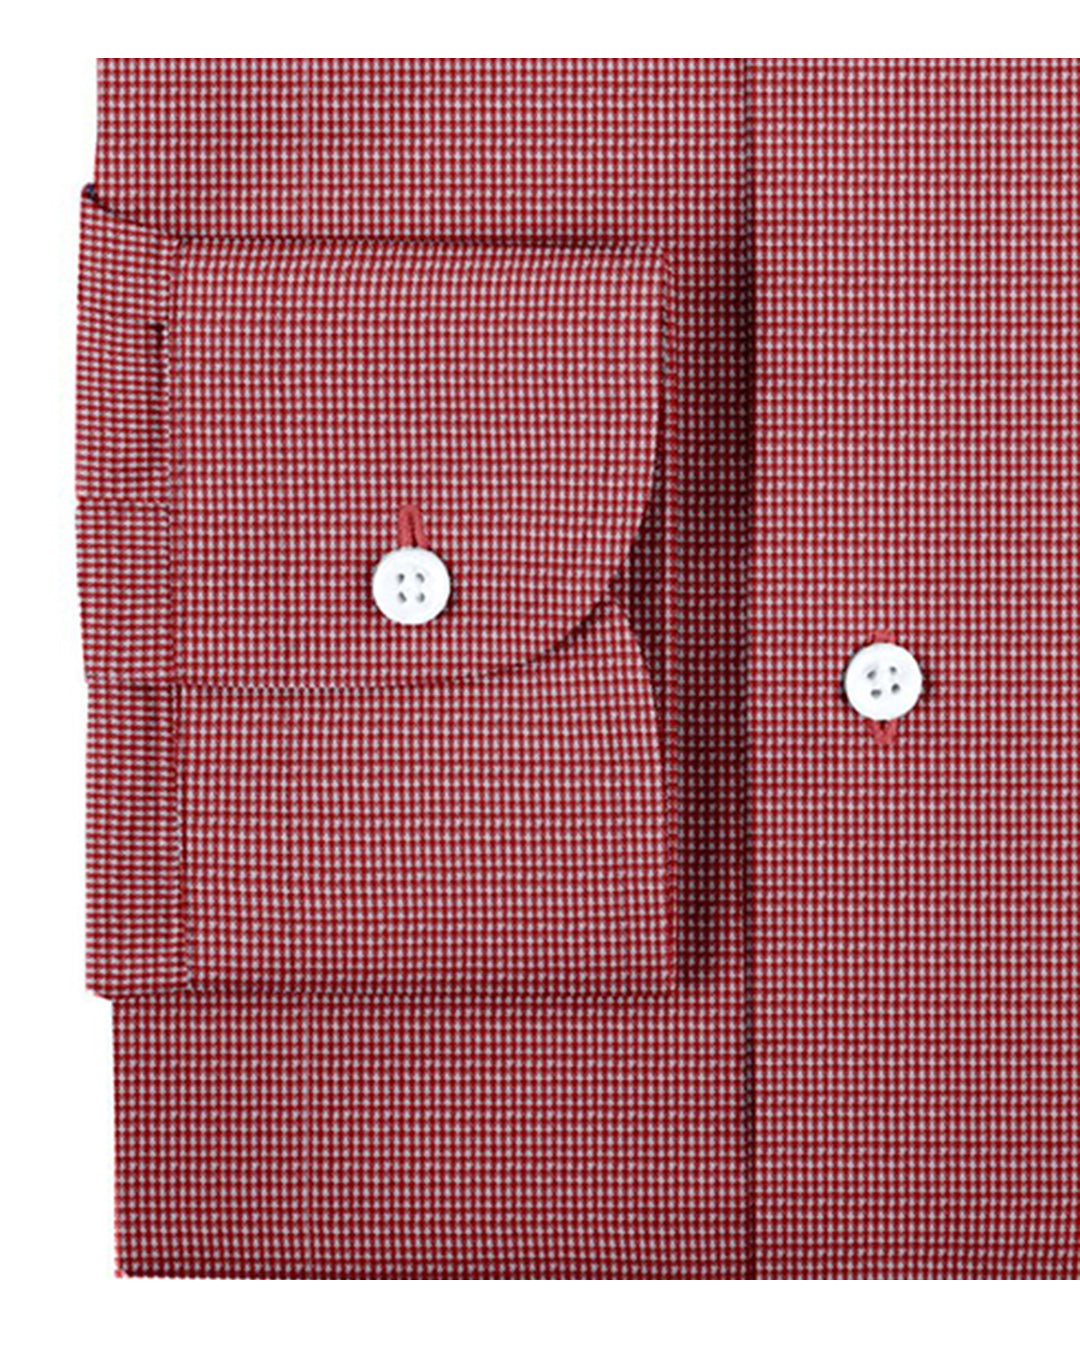 Cuff of the custom linen shirt for men in red and white checks by Luxire Clothing